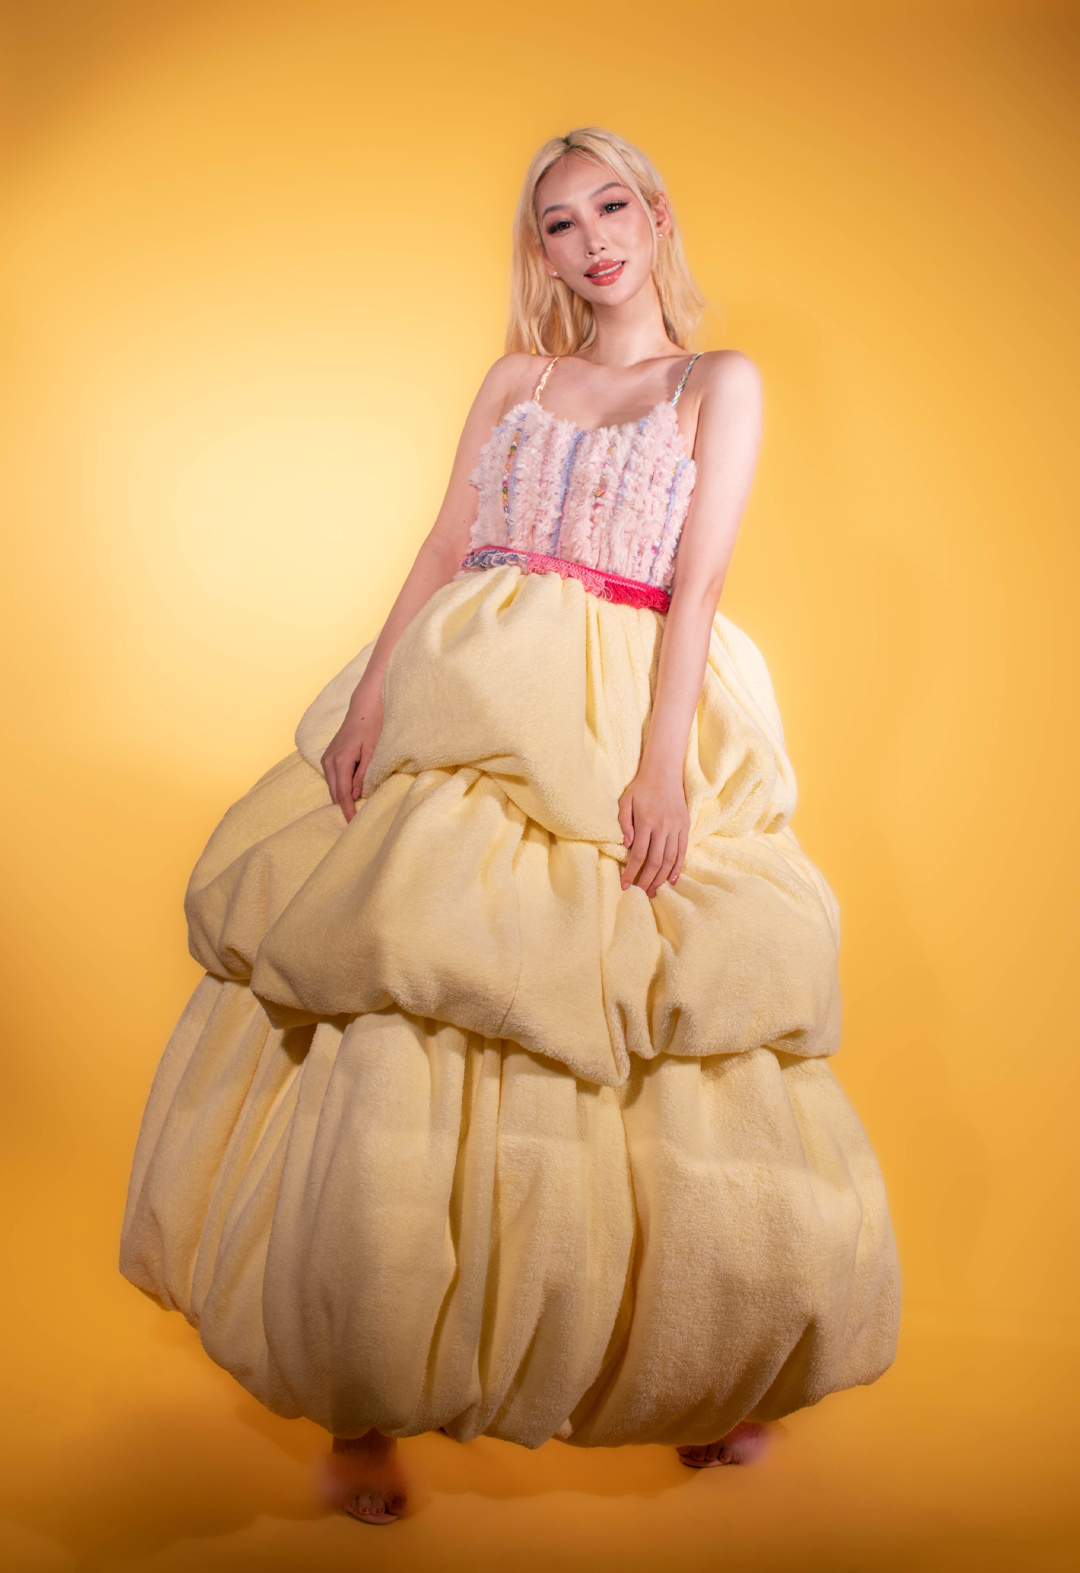 Photo of a girl with blonde hair wearing a pastel pink-and-yellow bubble dress. She is smiling and both of her hands are on the dress. The dress has two stripes with different colors, a light-pink furry bodice, a bright-pink knit belt and a light-yellow three-layered bubble skirt.